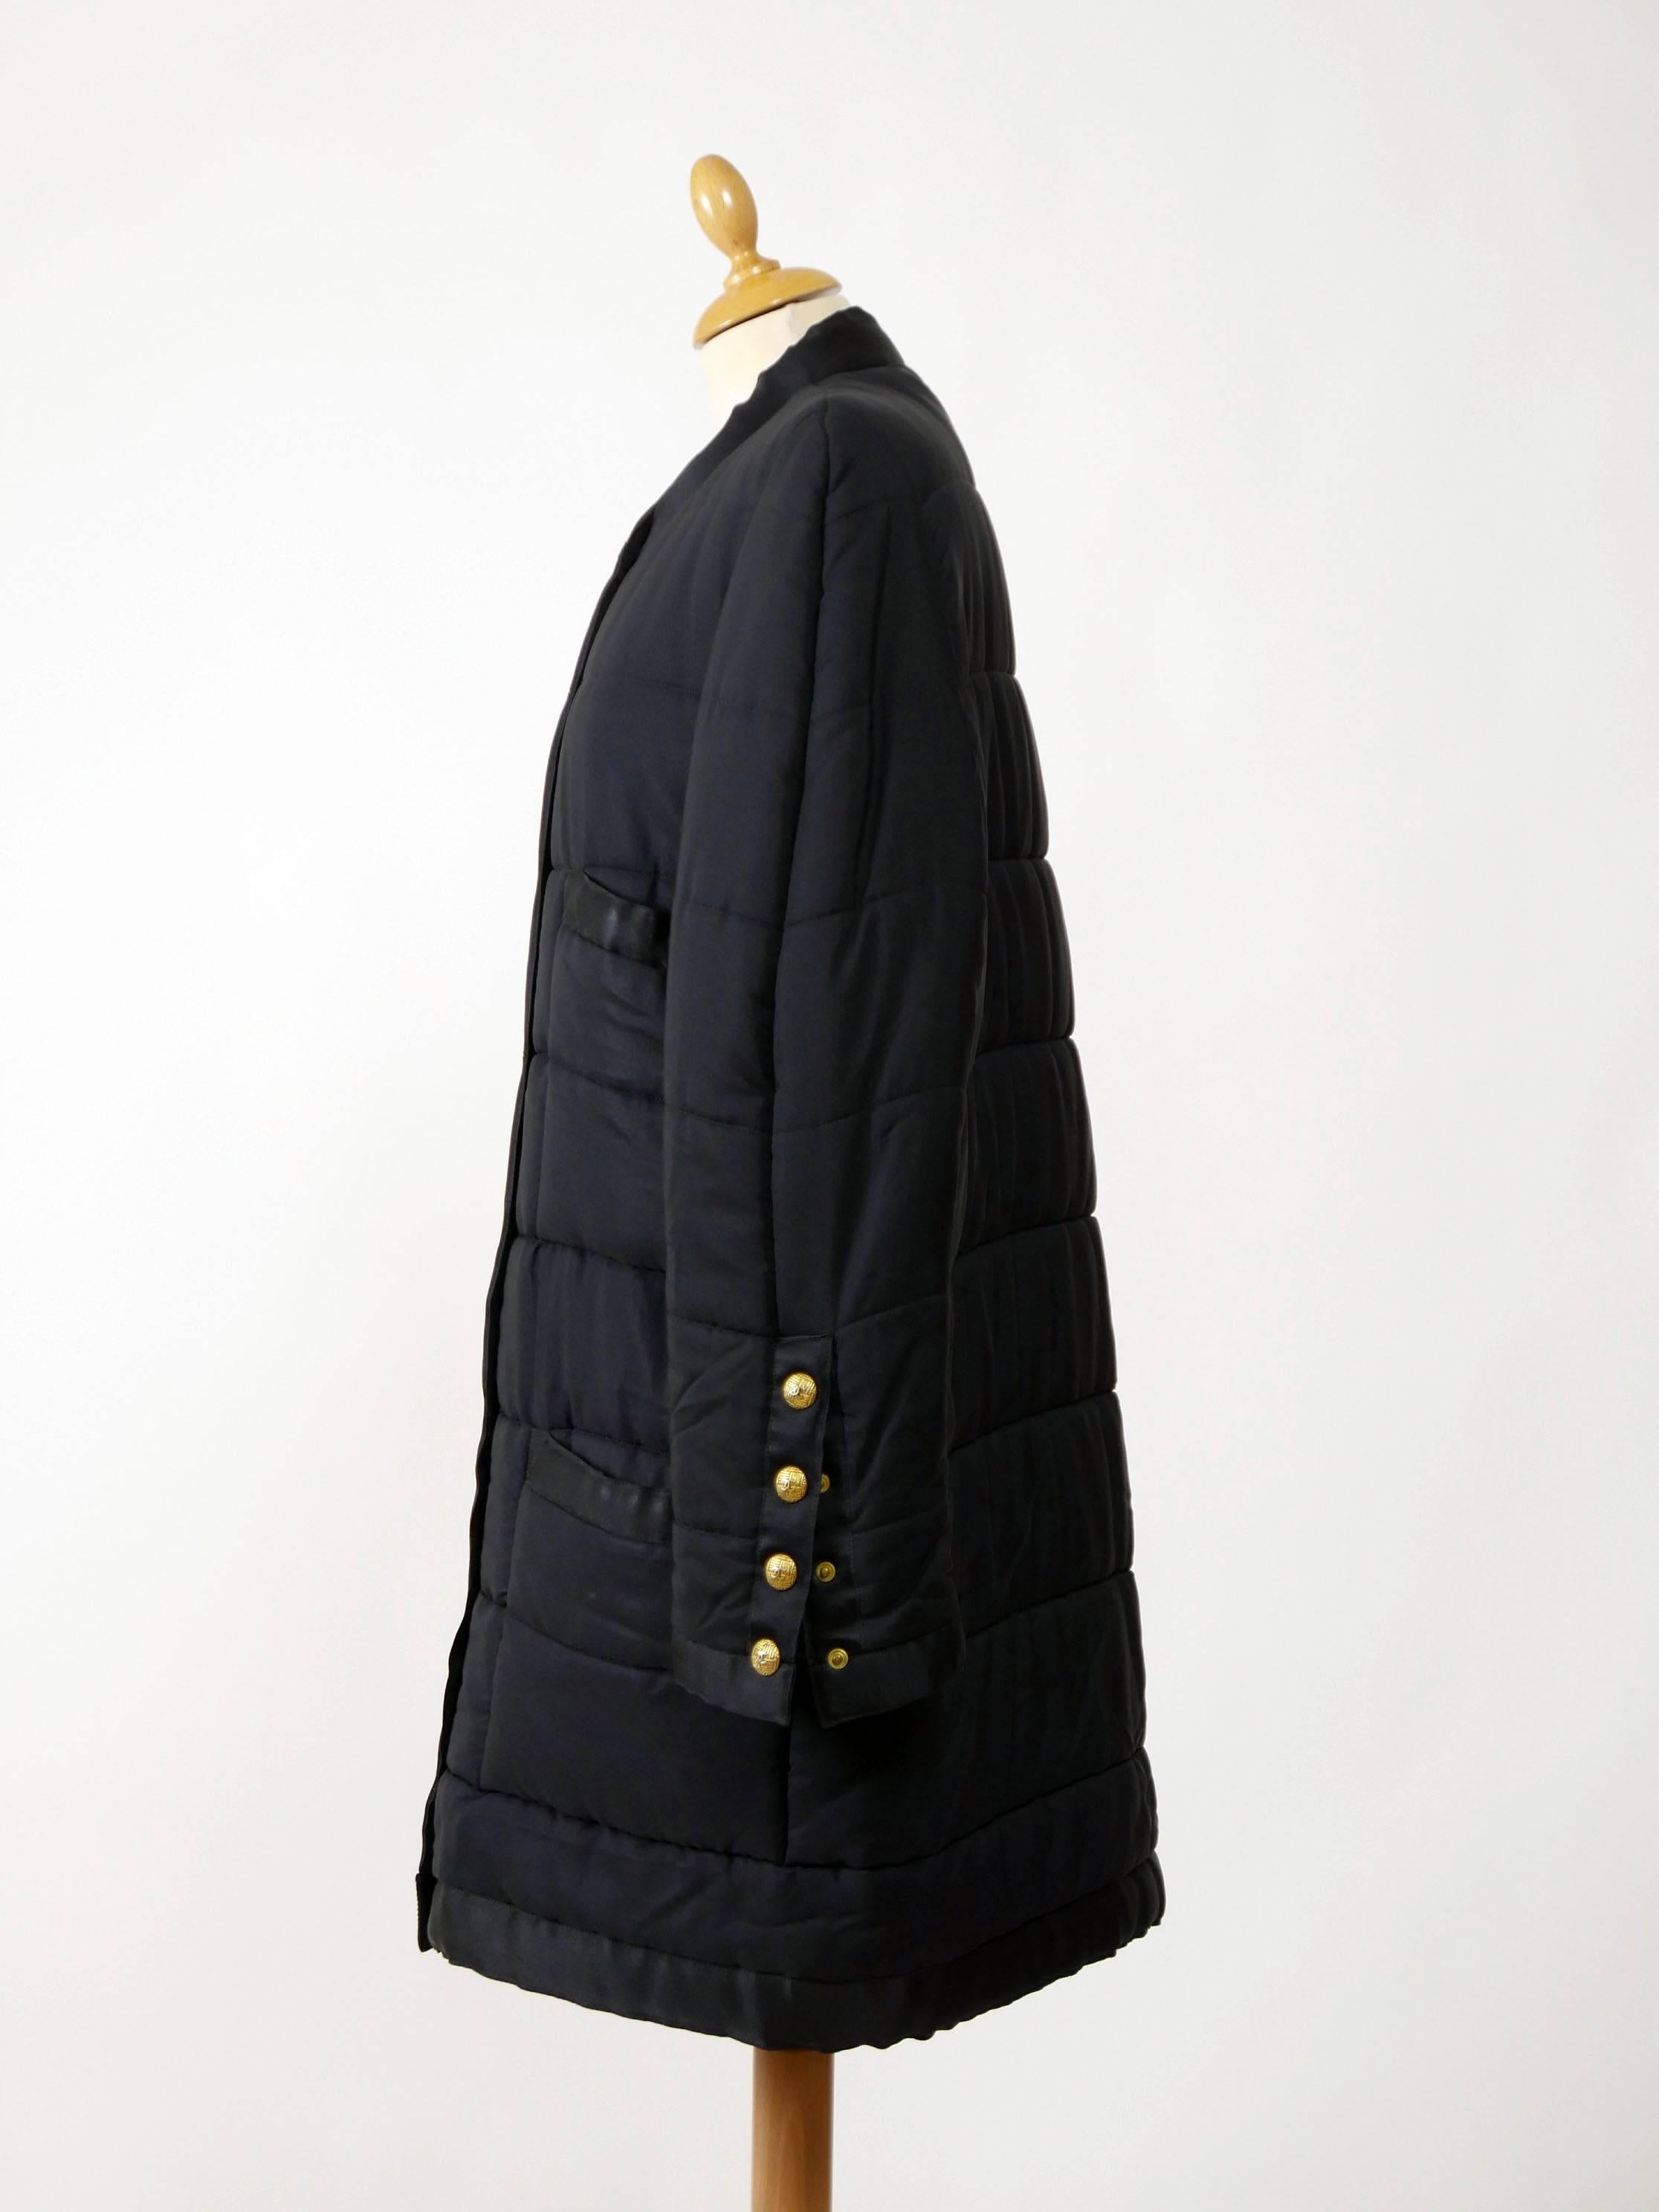 This lovely Chanel quilted coat is in black satin with black trim and gold tone CC logo snap buttons. It has four front pockets and it's fully lined.

Very good vintage condition

Label : Chanel Boutique
Fabric: satin
Color :